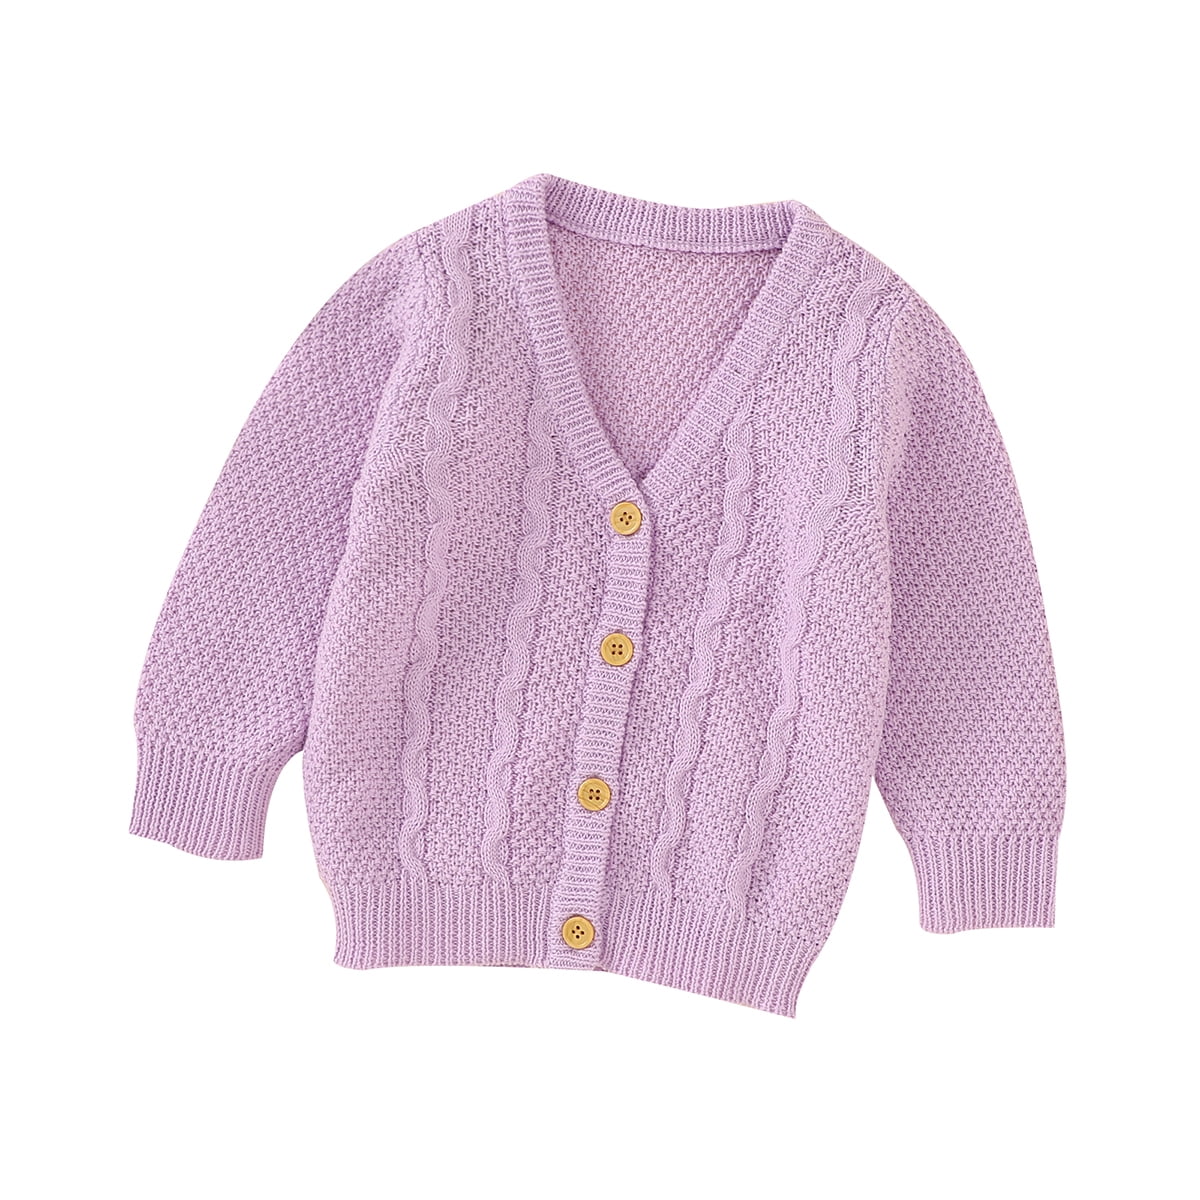 Kid Children Girl Maddins ColourSure Easy Care Warm Knitted Knit Cardigan